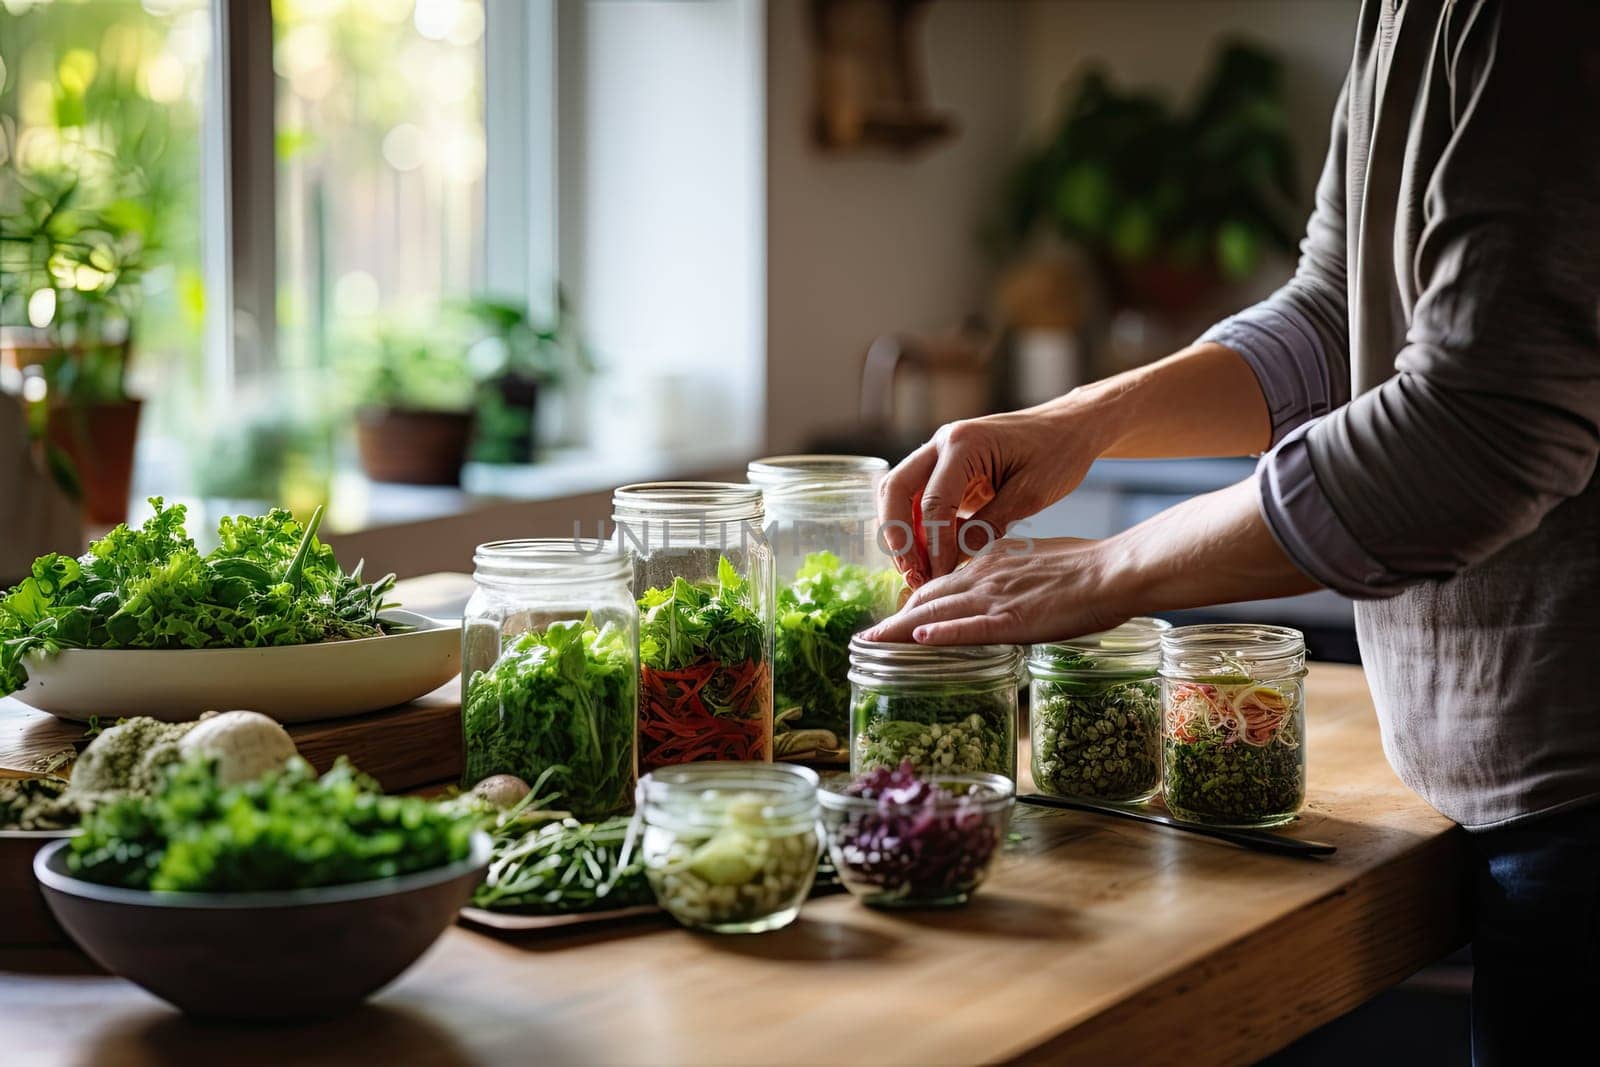 a person preparing food on a wooden cutting board in the background is an indoor kitchen setting with herbs and vegetables